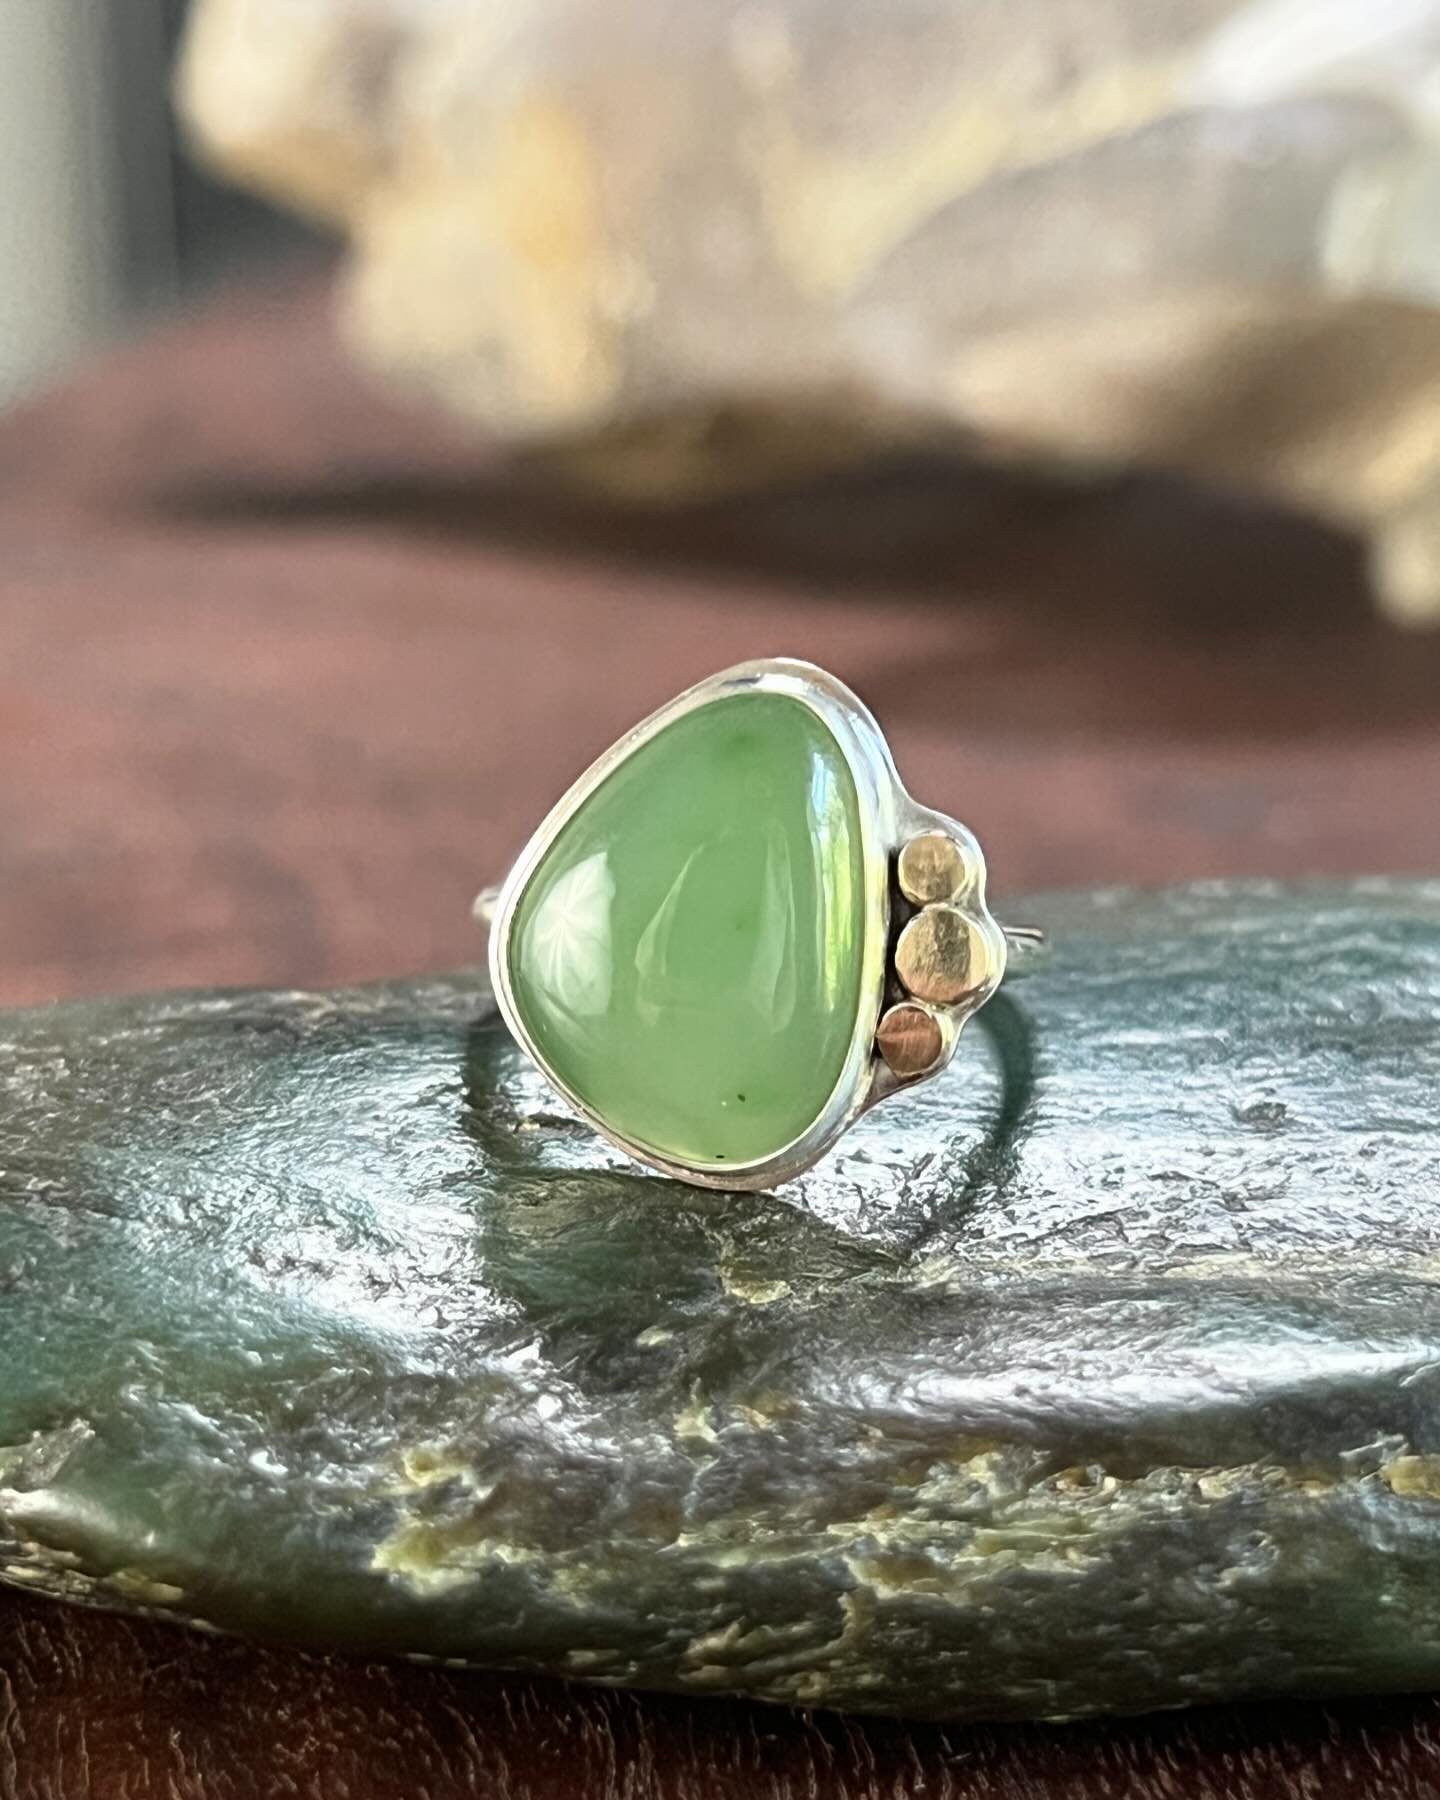 Presenting a size 6.5 sterling silver ring featuring a captivating Siberian green jade gemstone, encircled by fine gold details. This stunning creation embodies the tranquil allure of the jade, complemented by the elegant sterling silver band, making